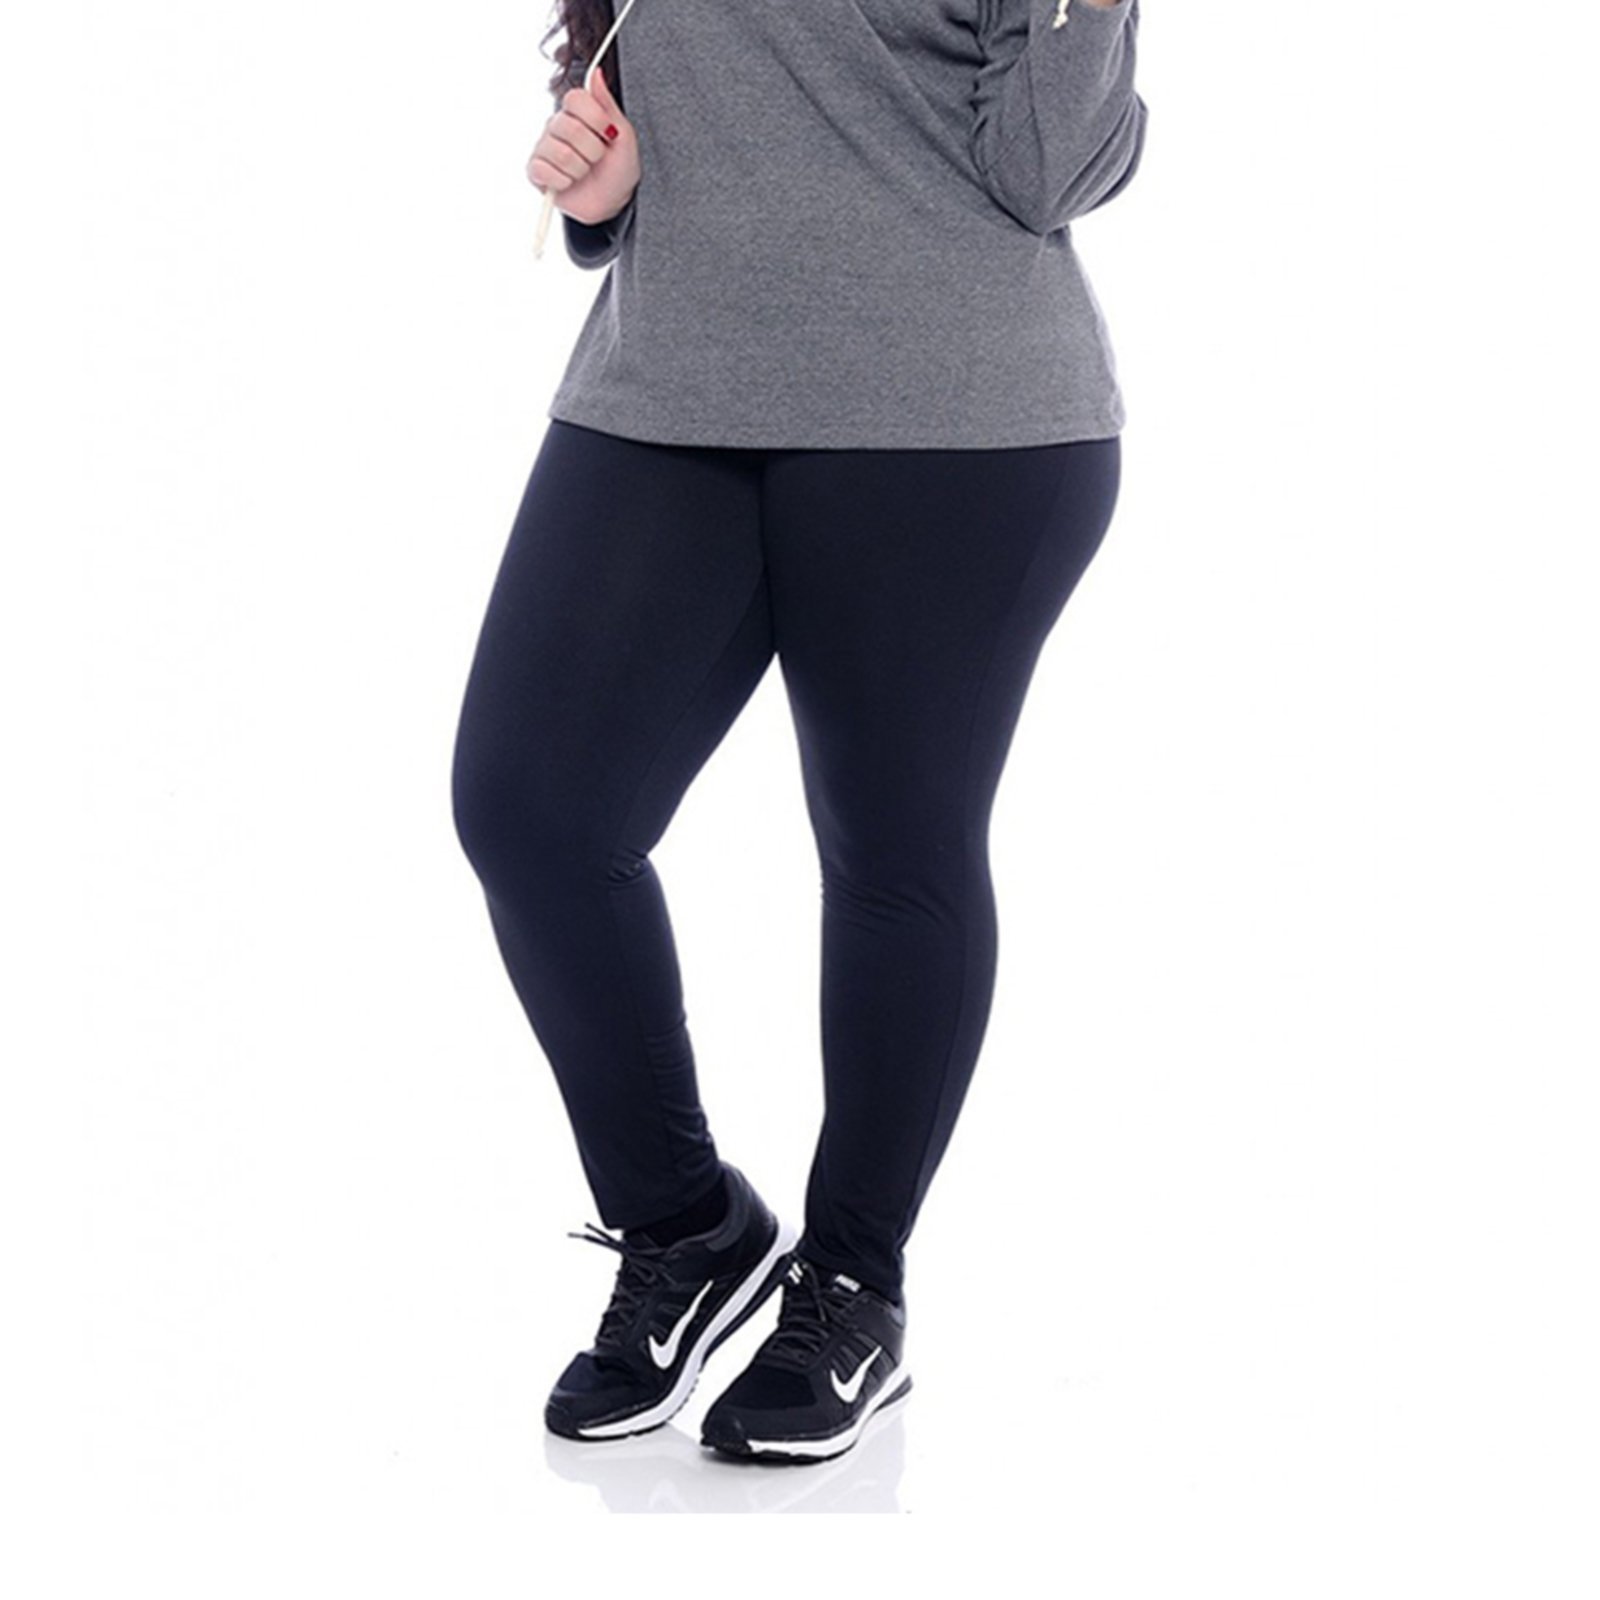 Intro Plus Size Love the Fit Pull-On Leggings